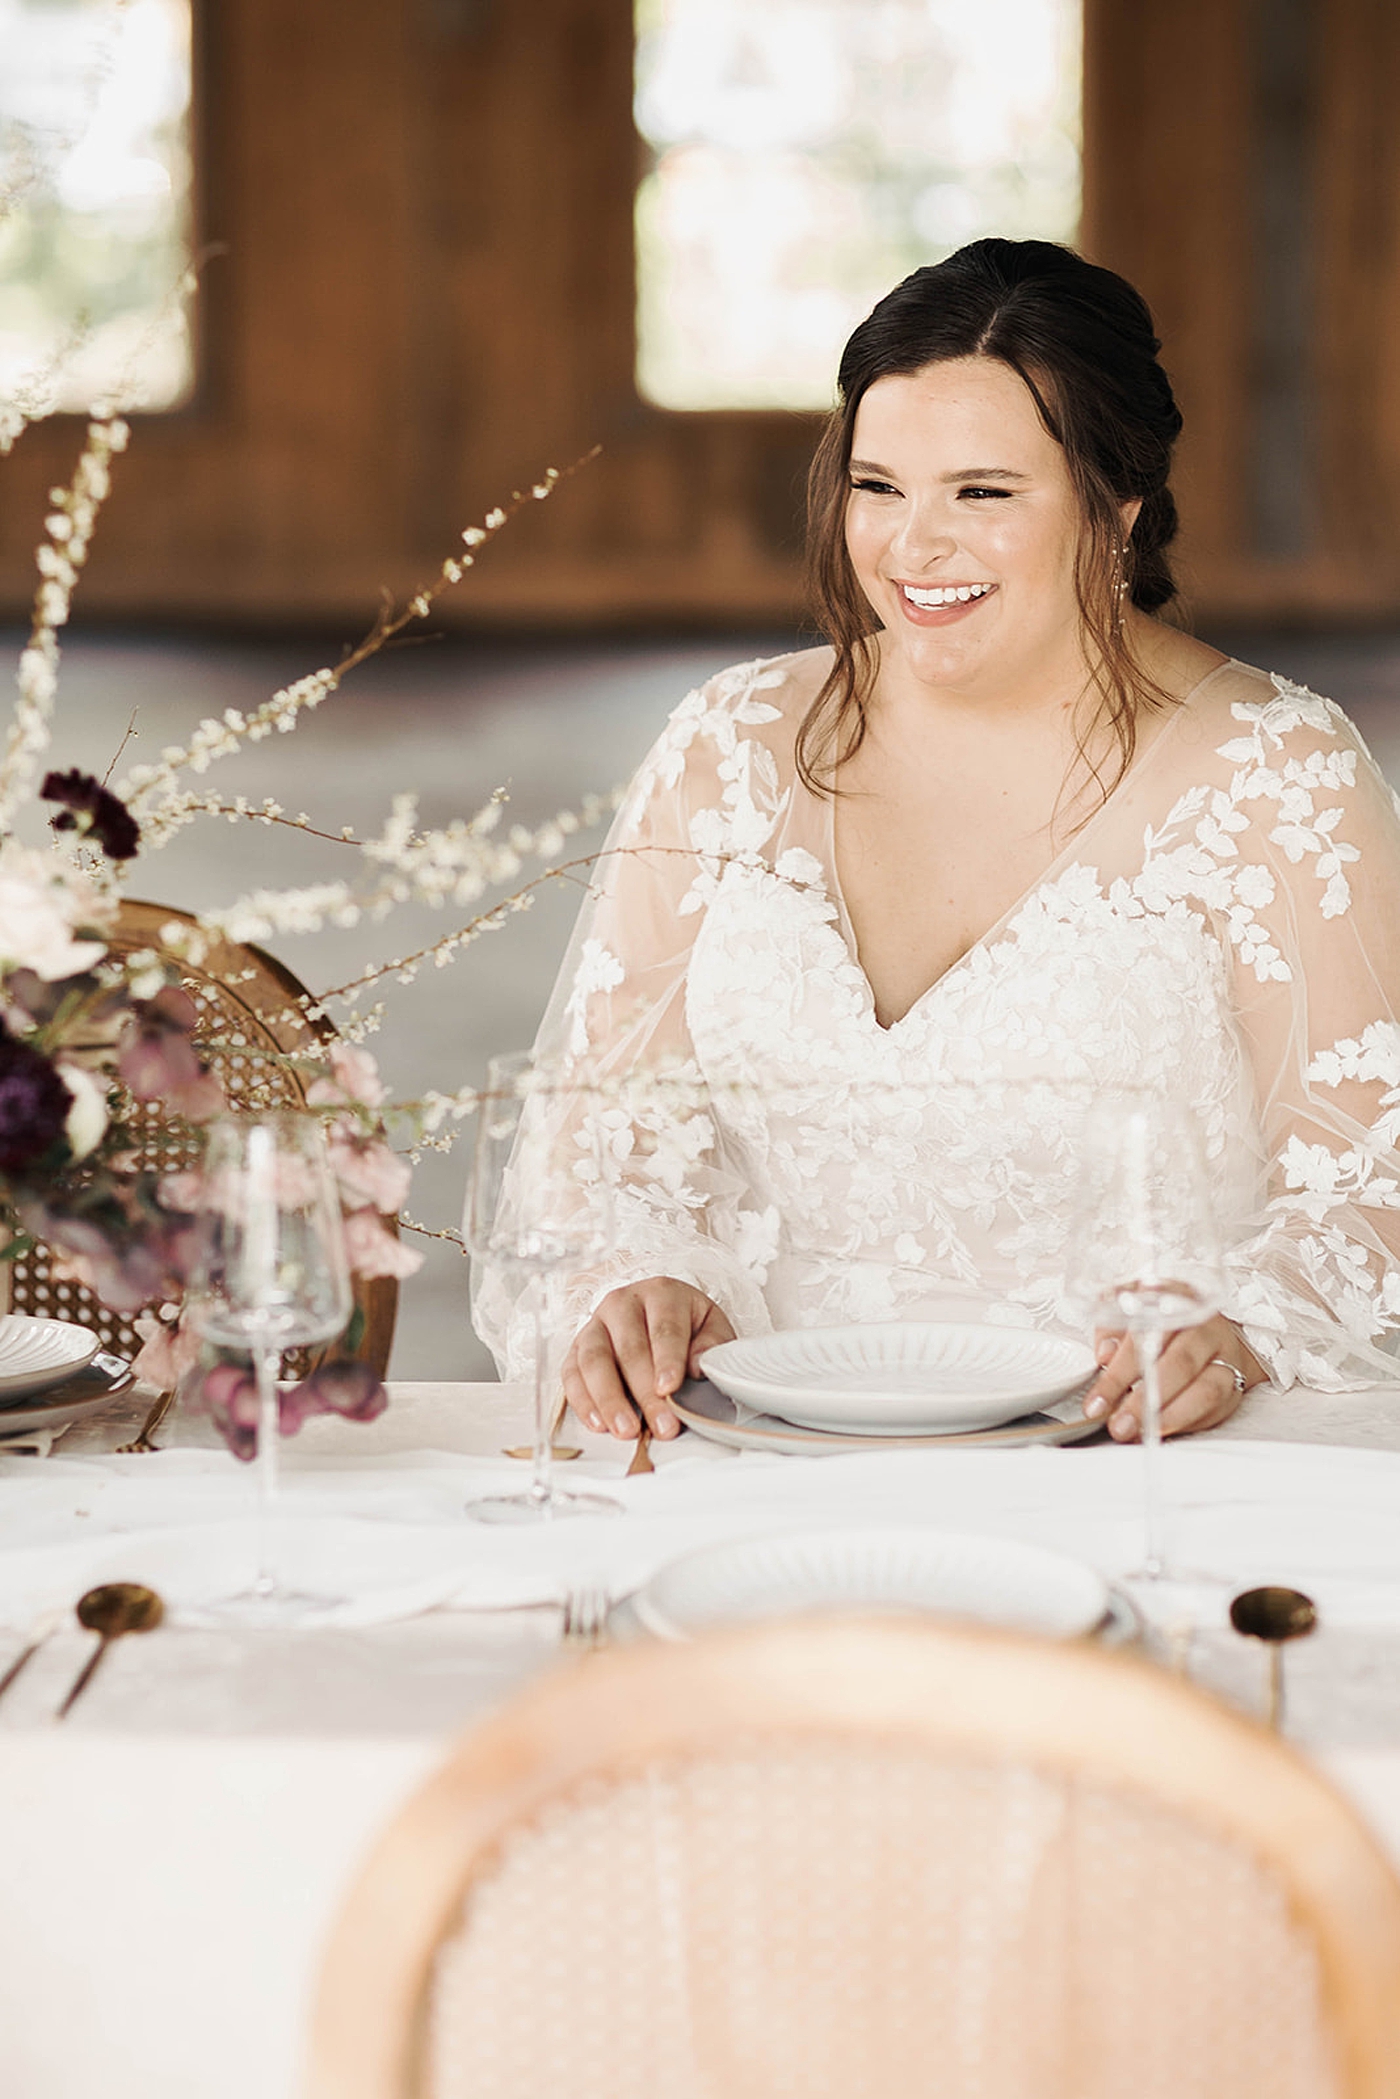 Bride in a lace gown smiling sitting at a table | Carters Event Co